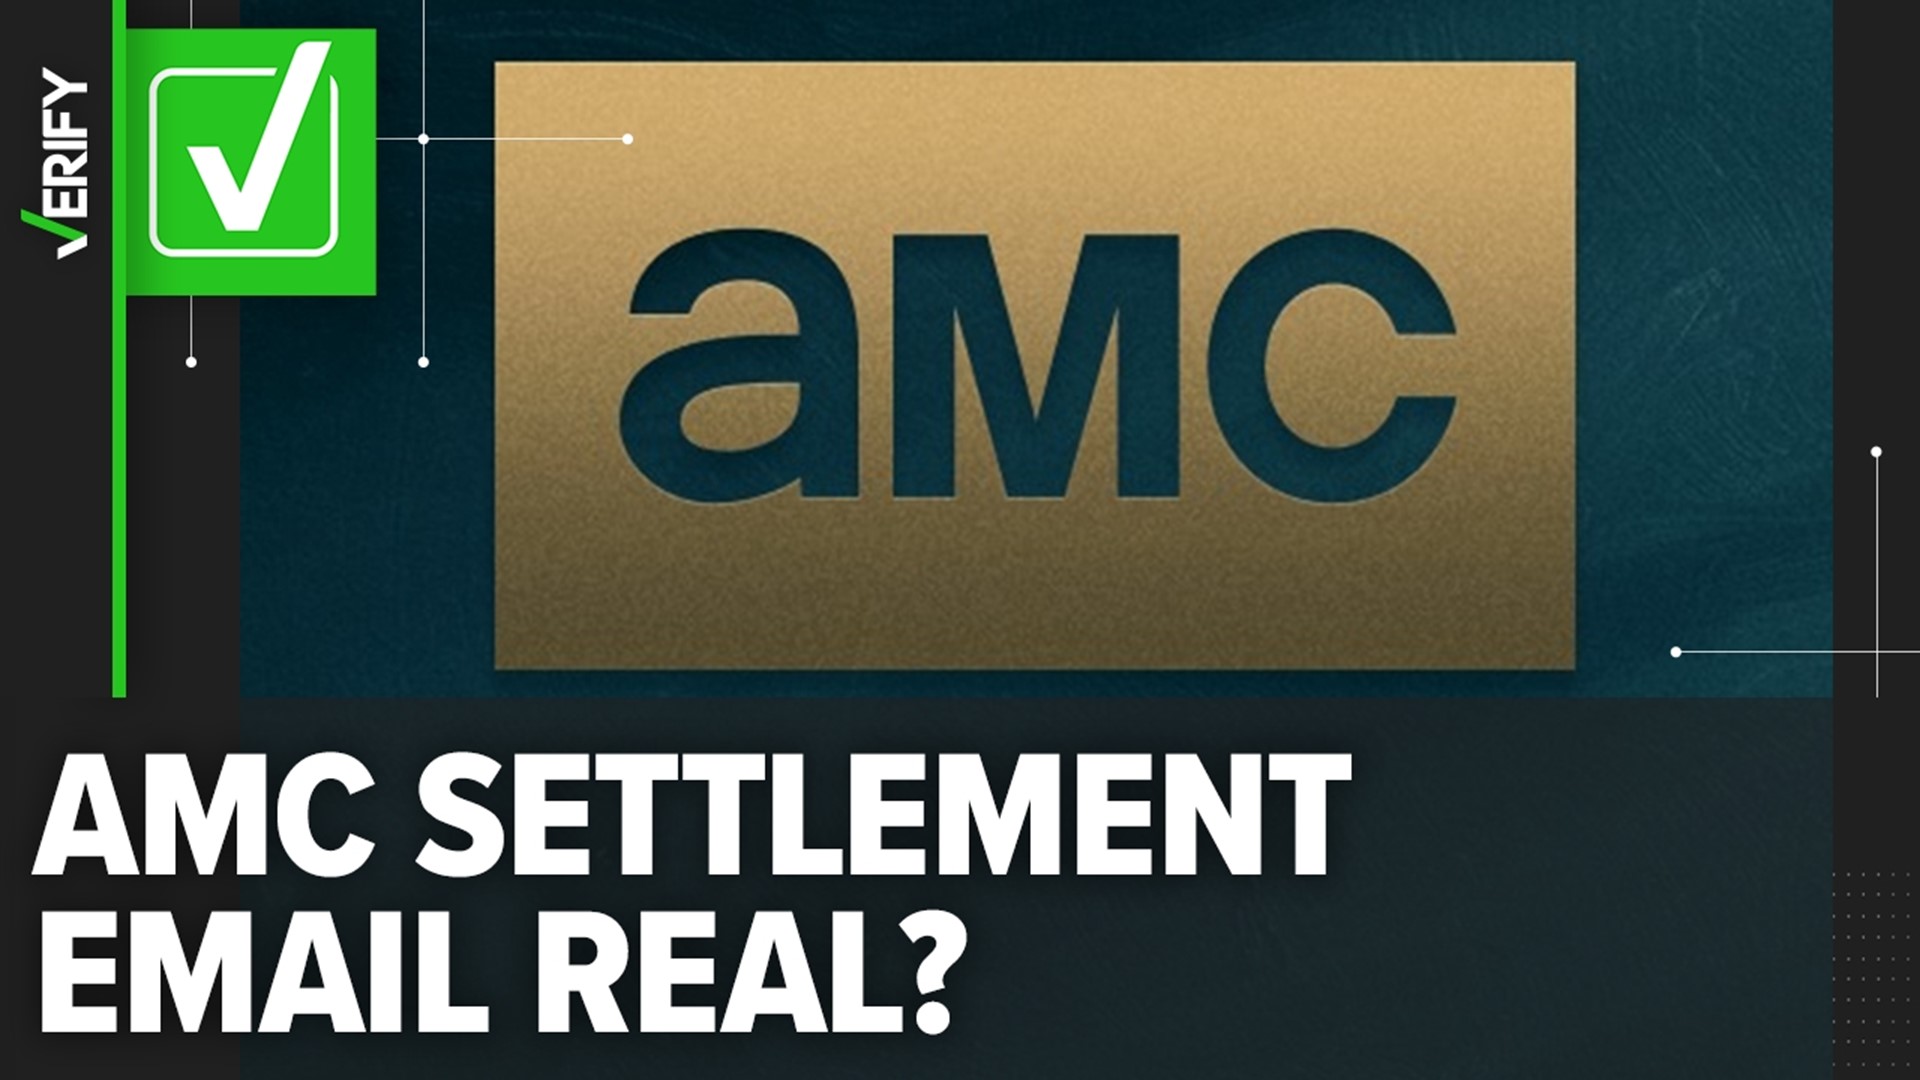 AMC, the movie theater company, settled a class action lawsuit for $8.3 million. Subscribers of streaming services like Acorn, Shudder and HIDIVE can file claims.